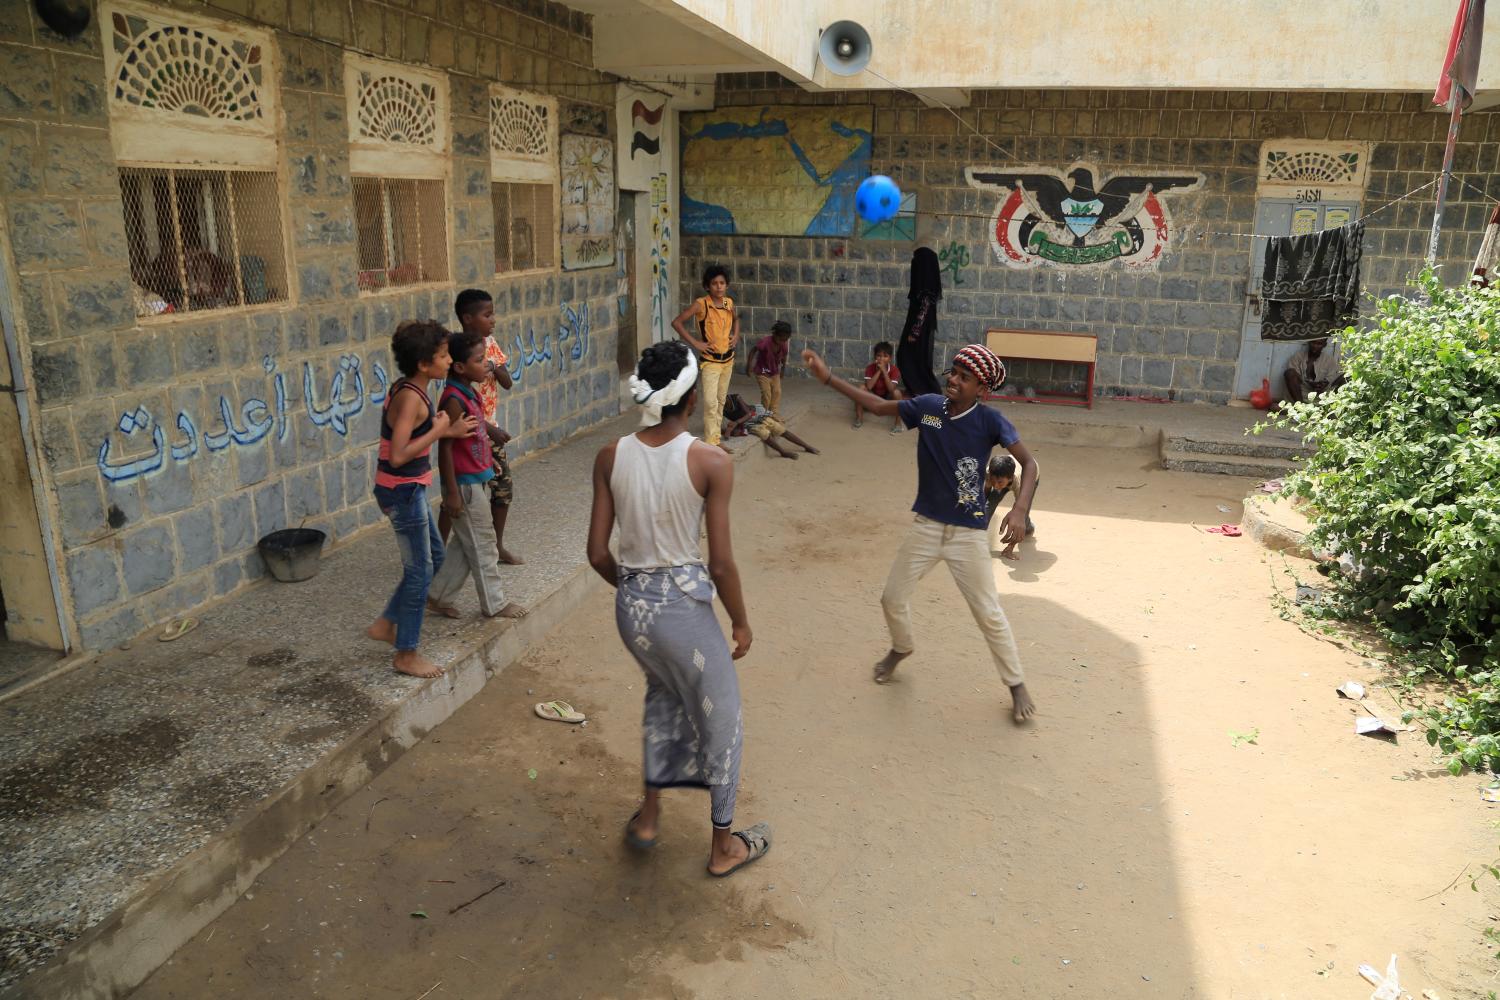 Displaced people play at a school where they live in al-Qatea near Hodeidah, Yemen July 16, 2018. Picture taken July 16, 2018. REUTERS/Abduljabbar Zeyad